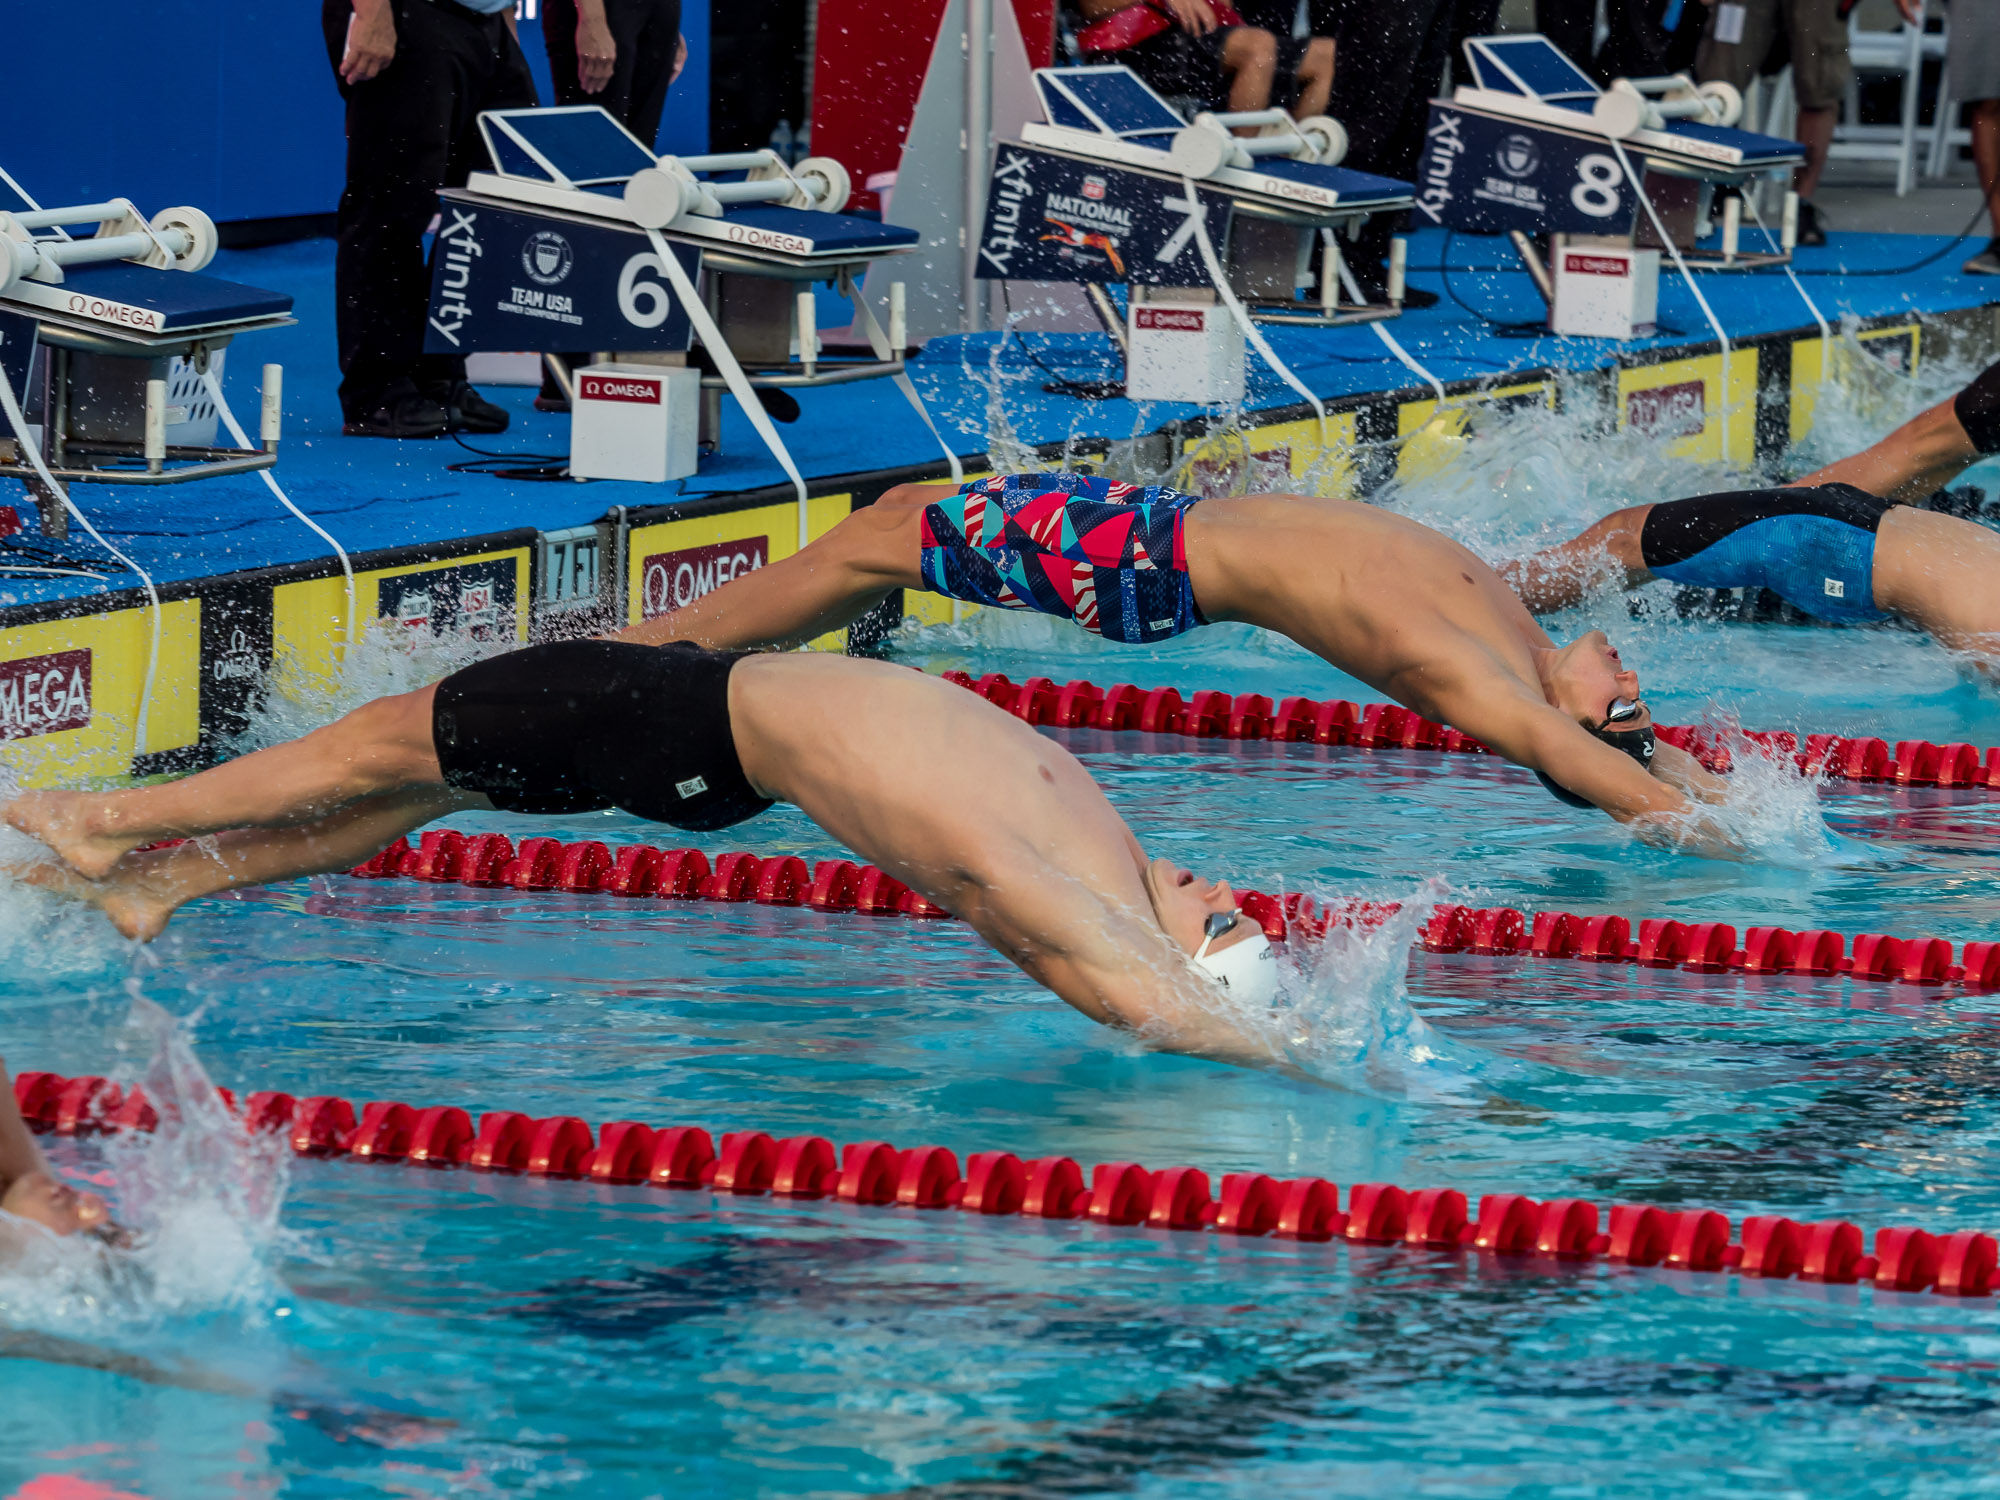 Watch All Race Videos From Day 2 of the 2018 Phillips 66 U.S